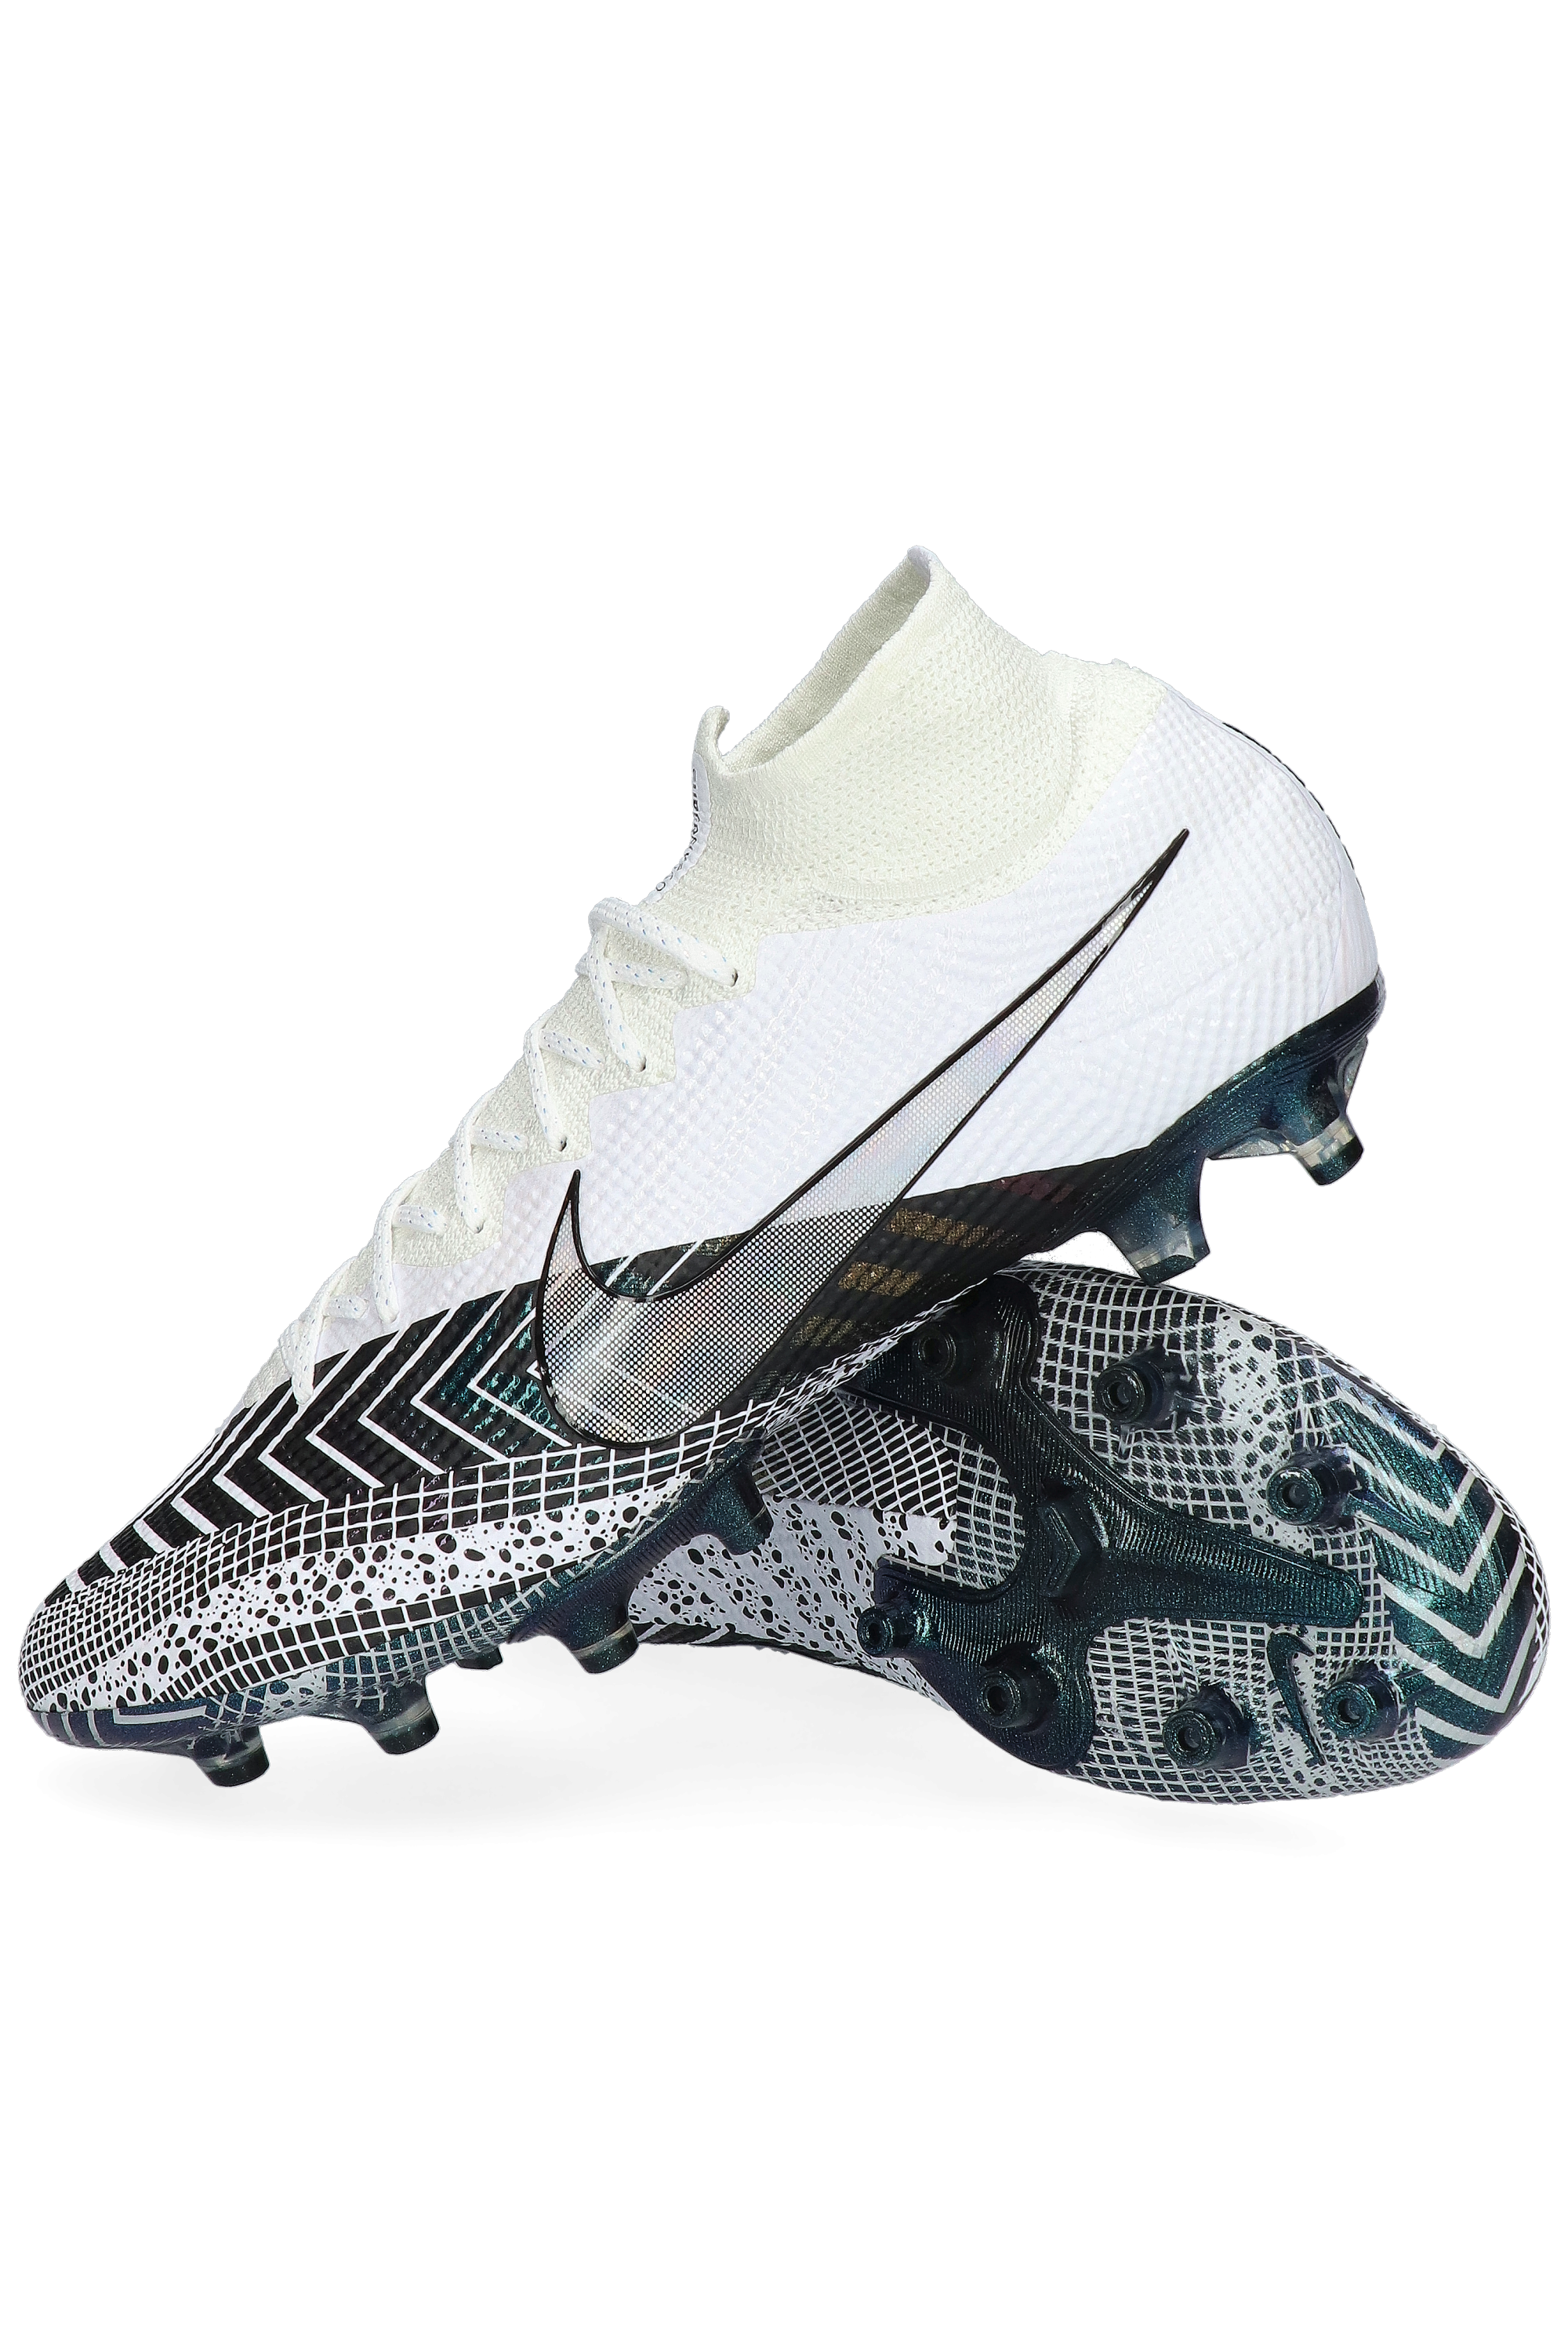 Nike Mercurial Vapor 13 Pro MDS FG football shoes For the next games  reach for the Nike Mercurial mens football boots and speed up  exclusively at selected Department  TappooCity  Shopping